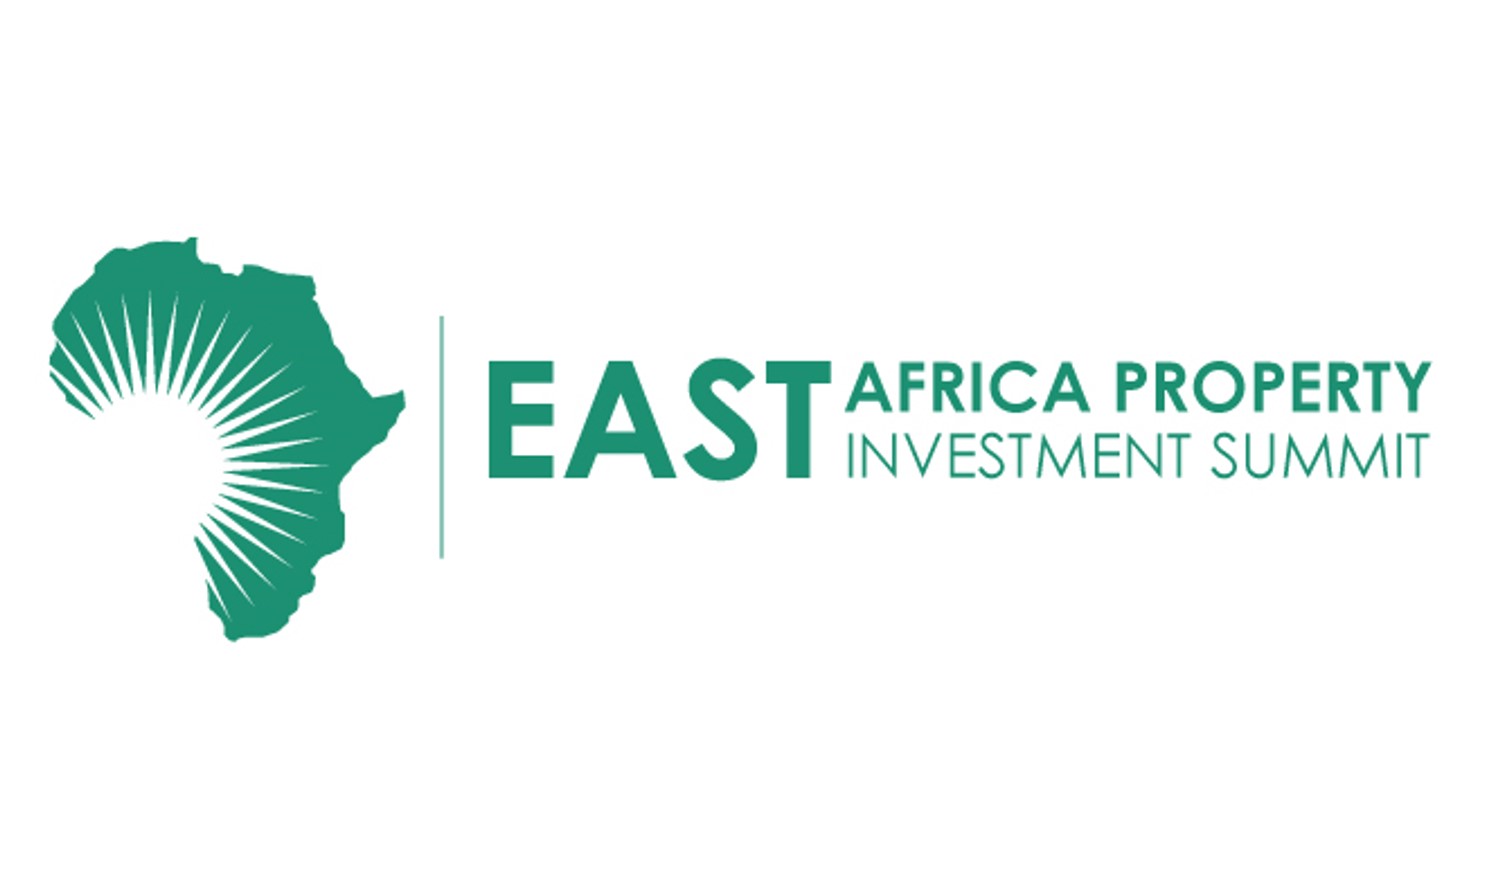 East Africa Property Investment (EAPI) Summit organized by API Events